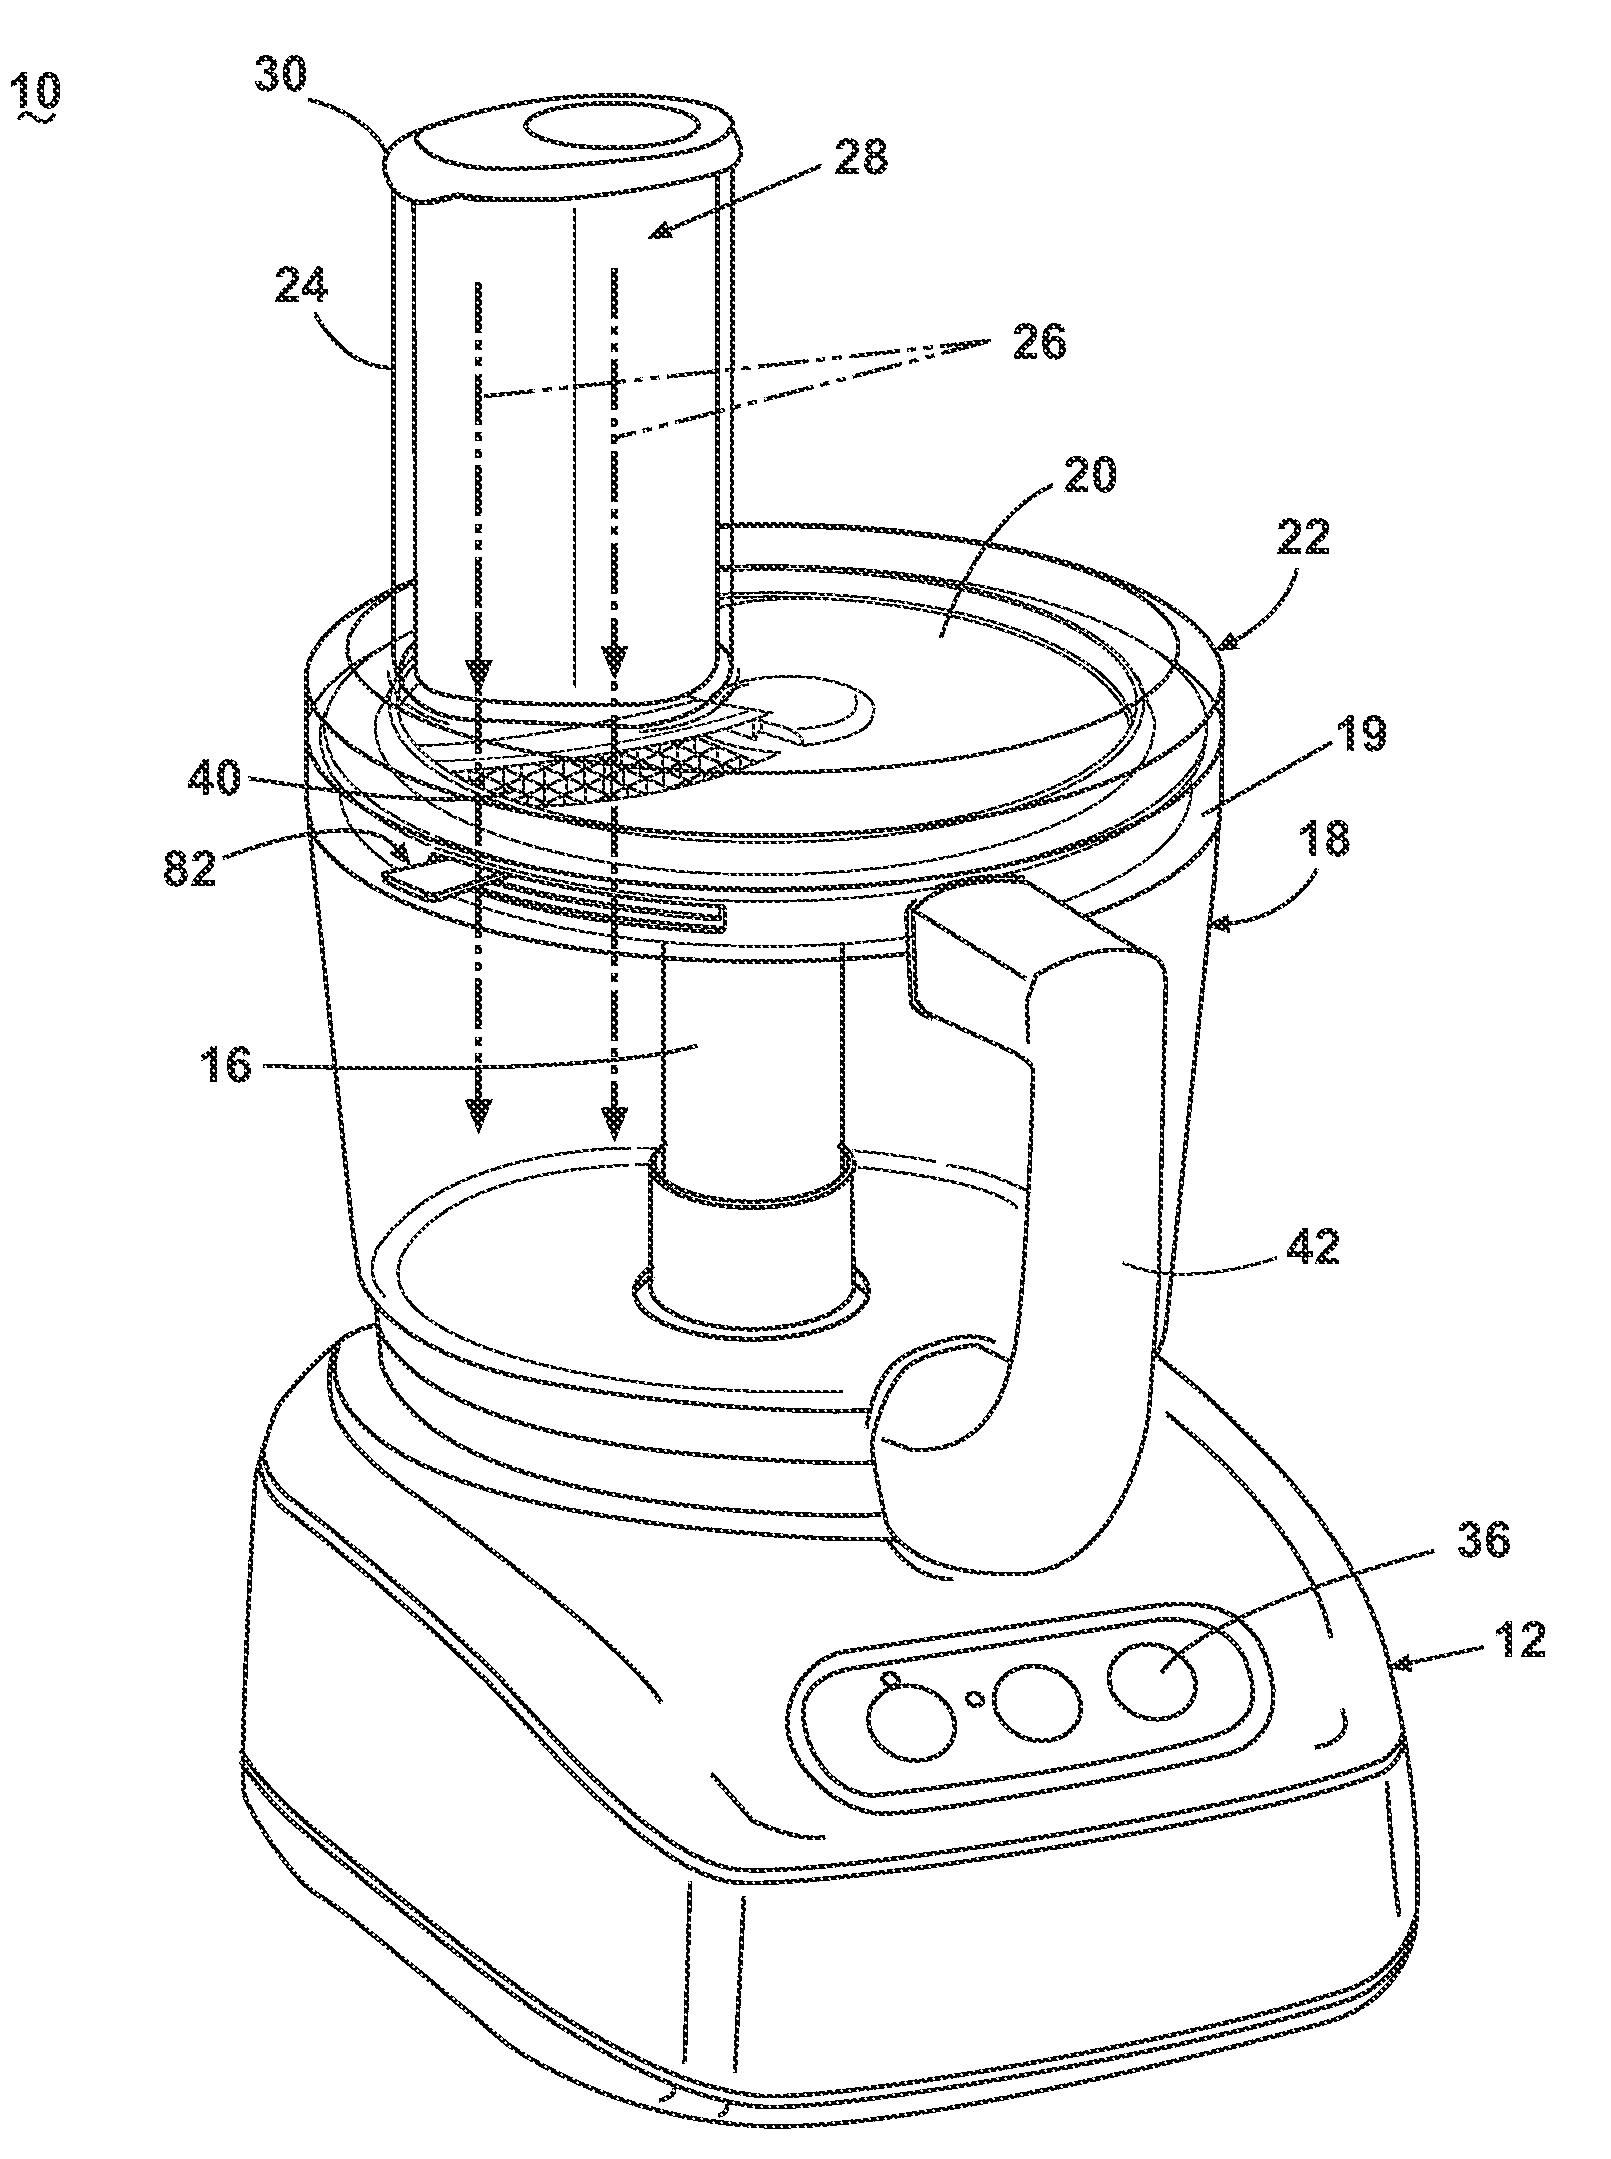 Food processor with dicing tool